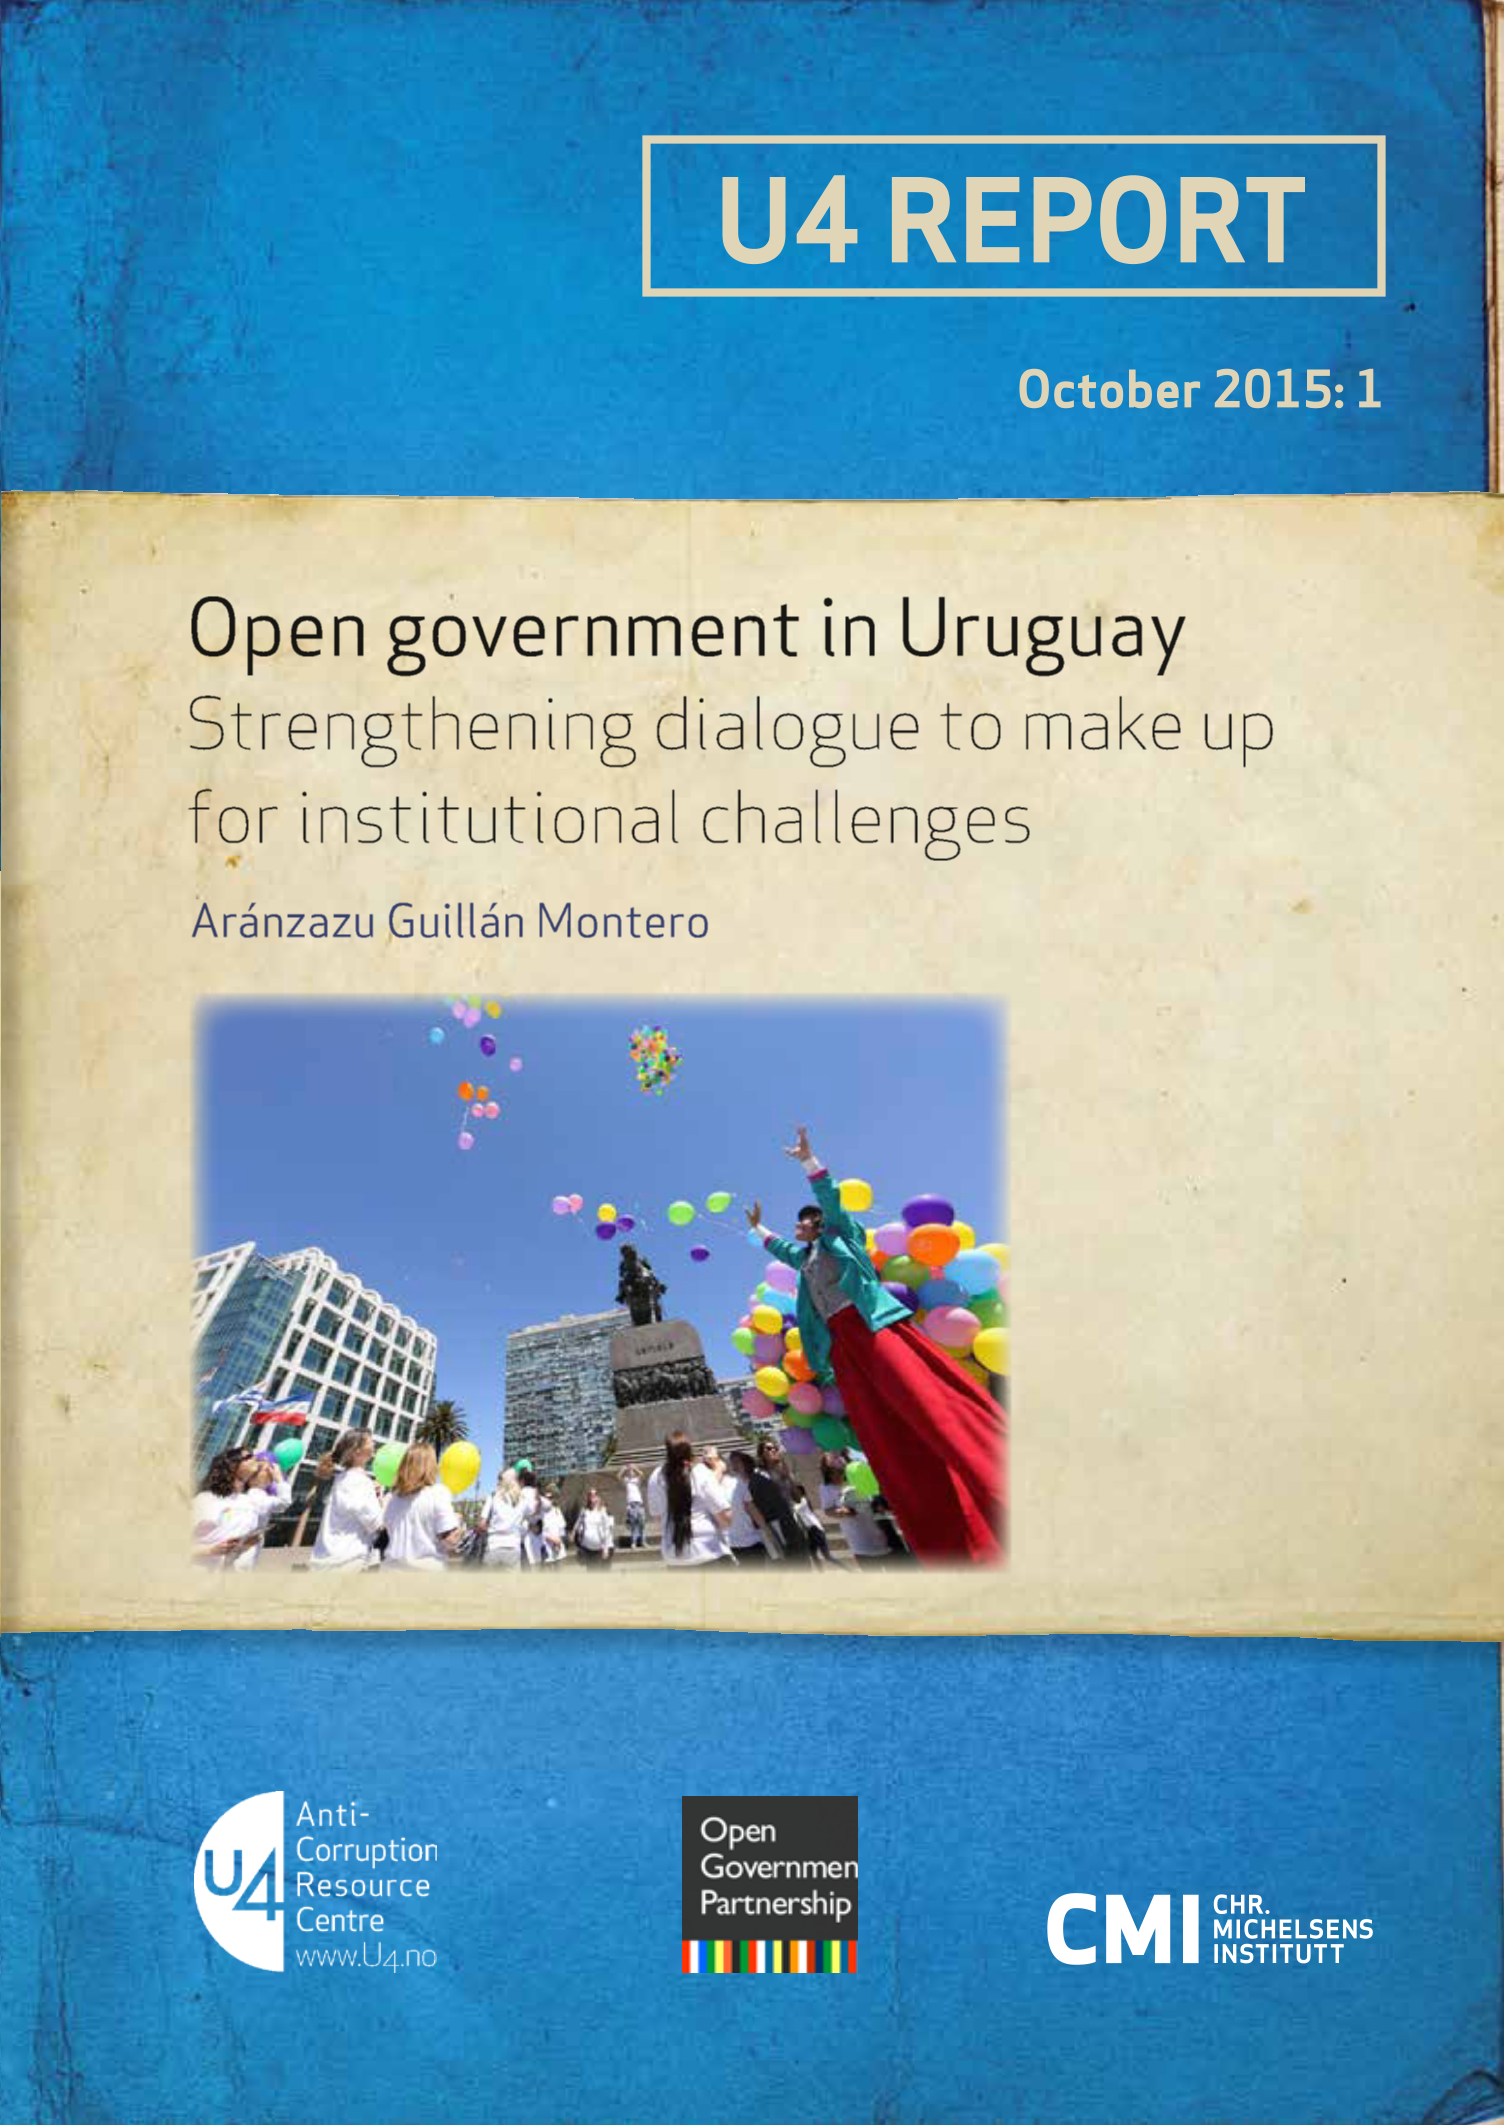 Open government in Uruguay: Strengthening dialogue to make up for institutional challenges